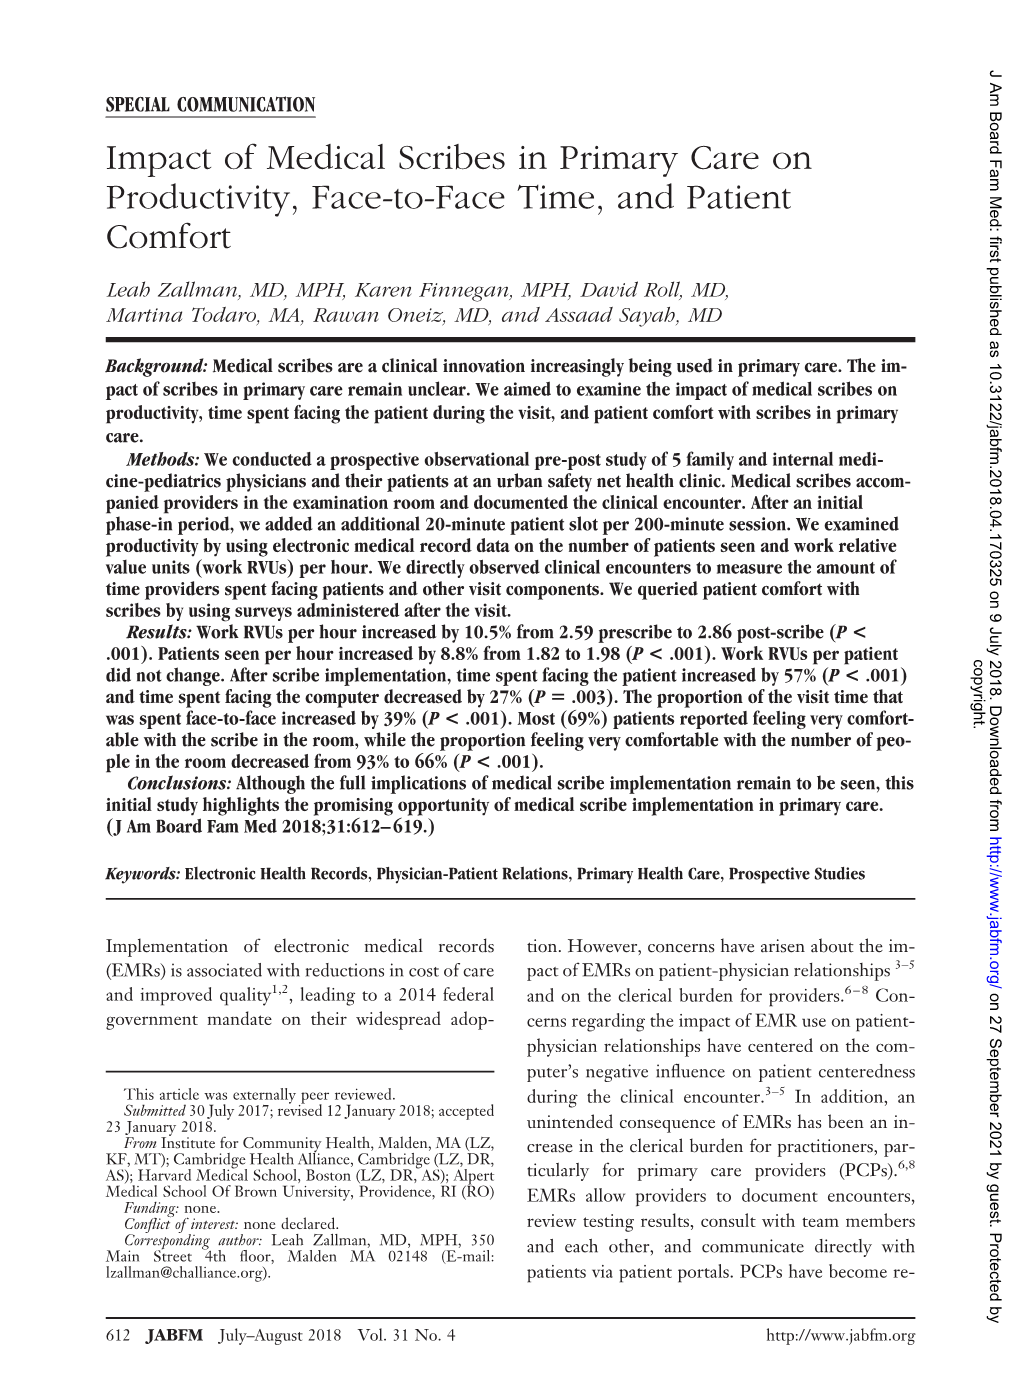 Impact of Medical Scribes in Primary Care on Productivity, Face-To-Face Time, and Patient Comfort